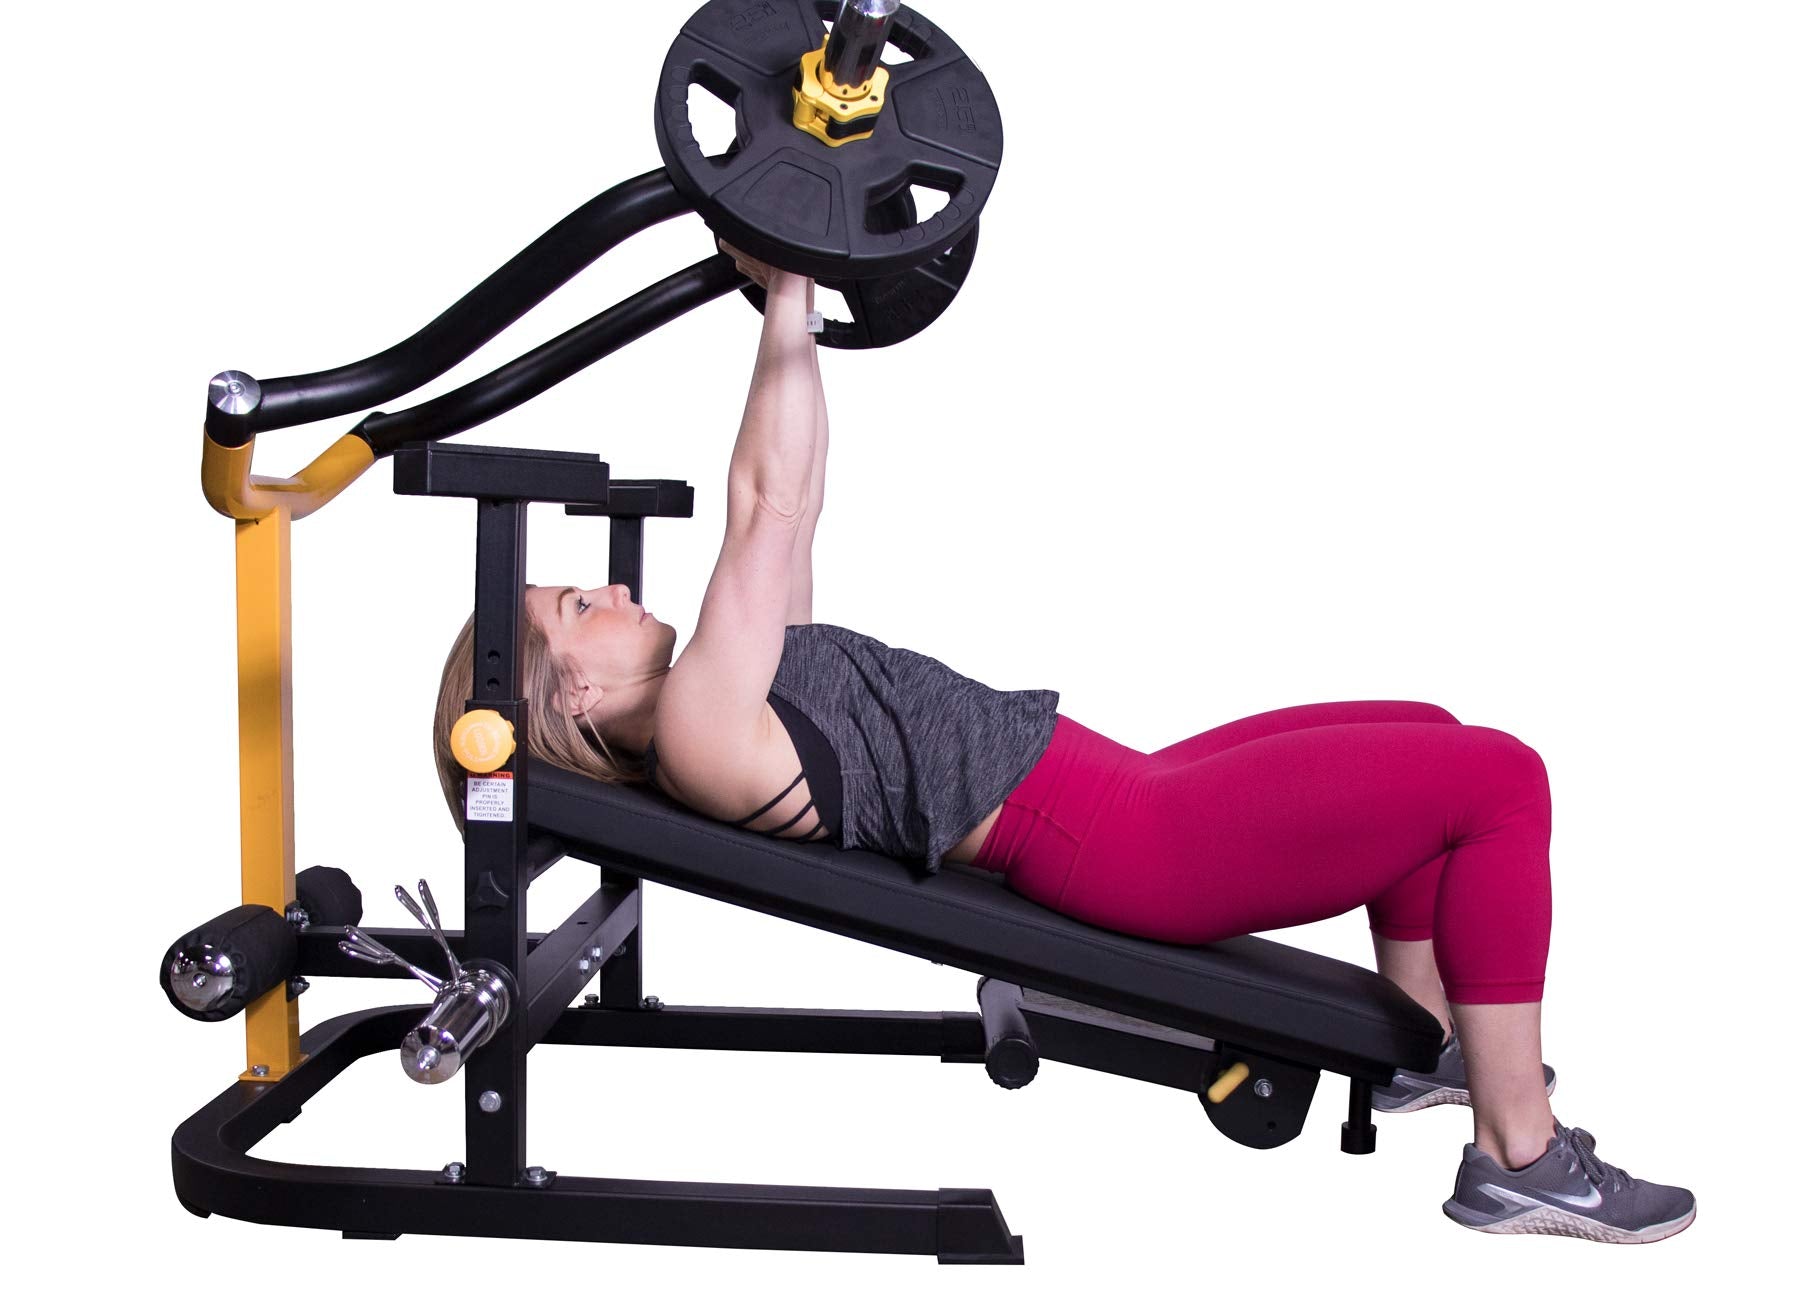 Fitking ISO Chest Machine - Plate Loaded